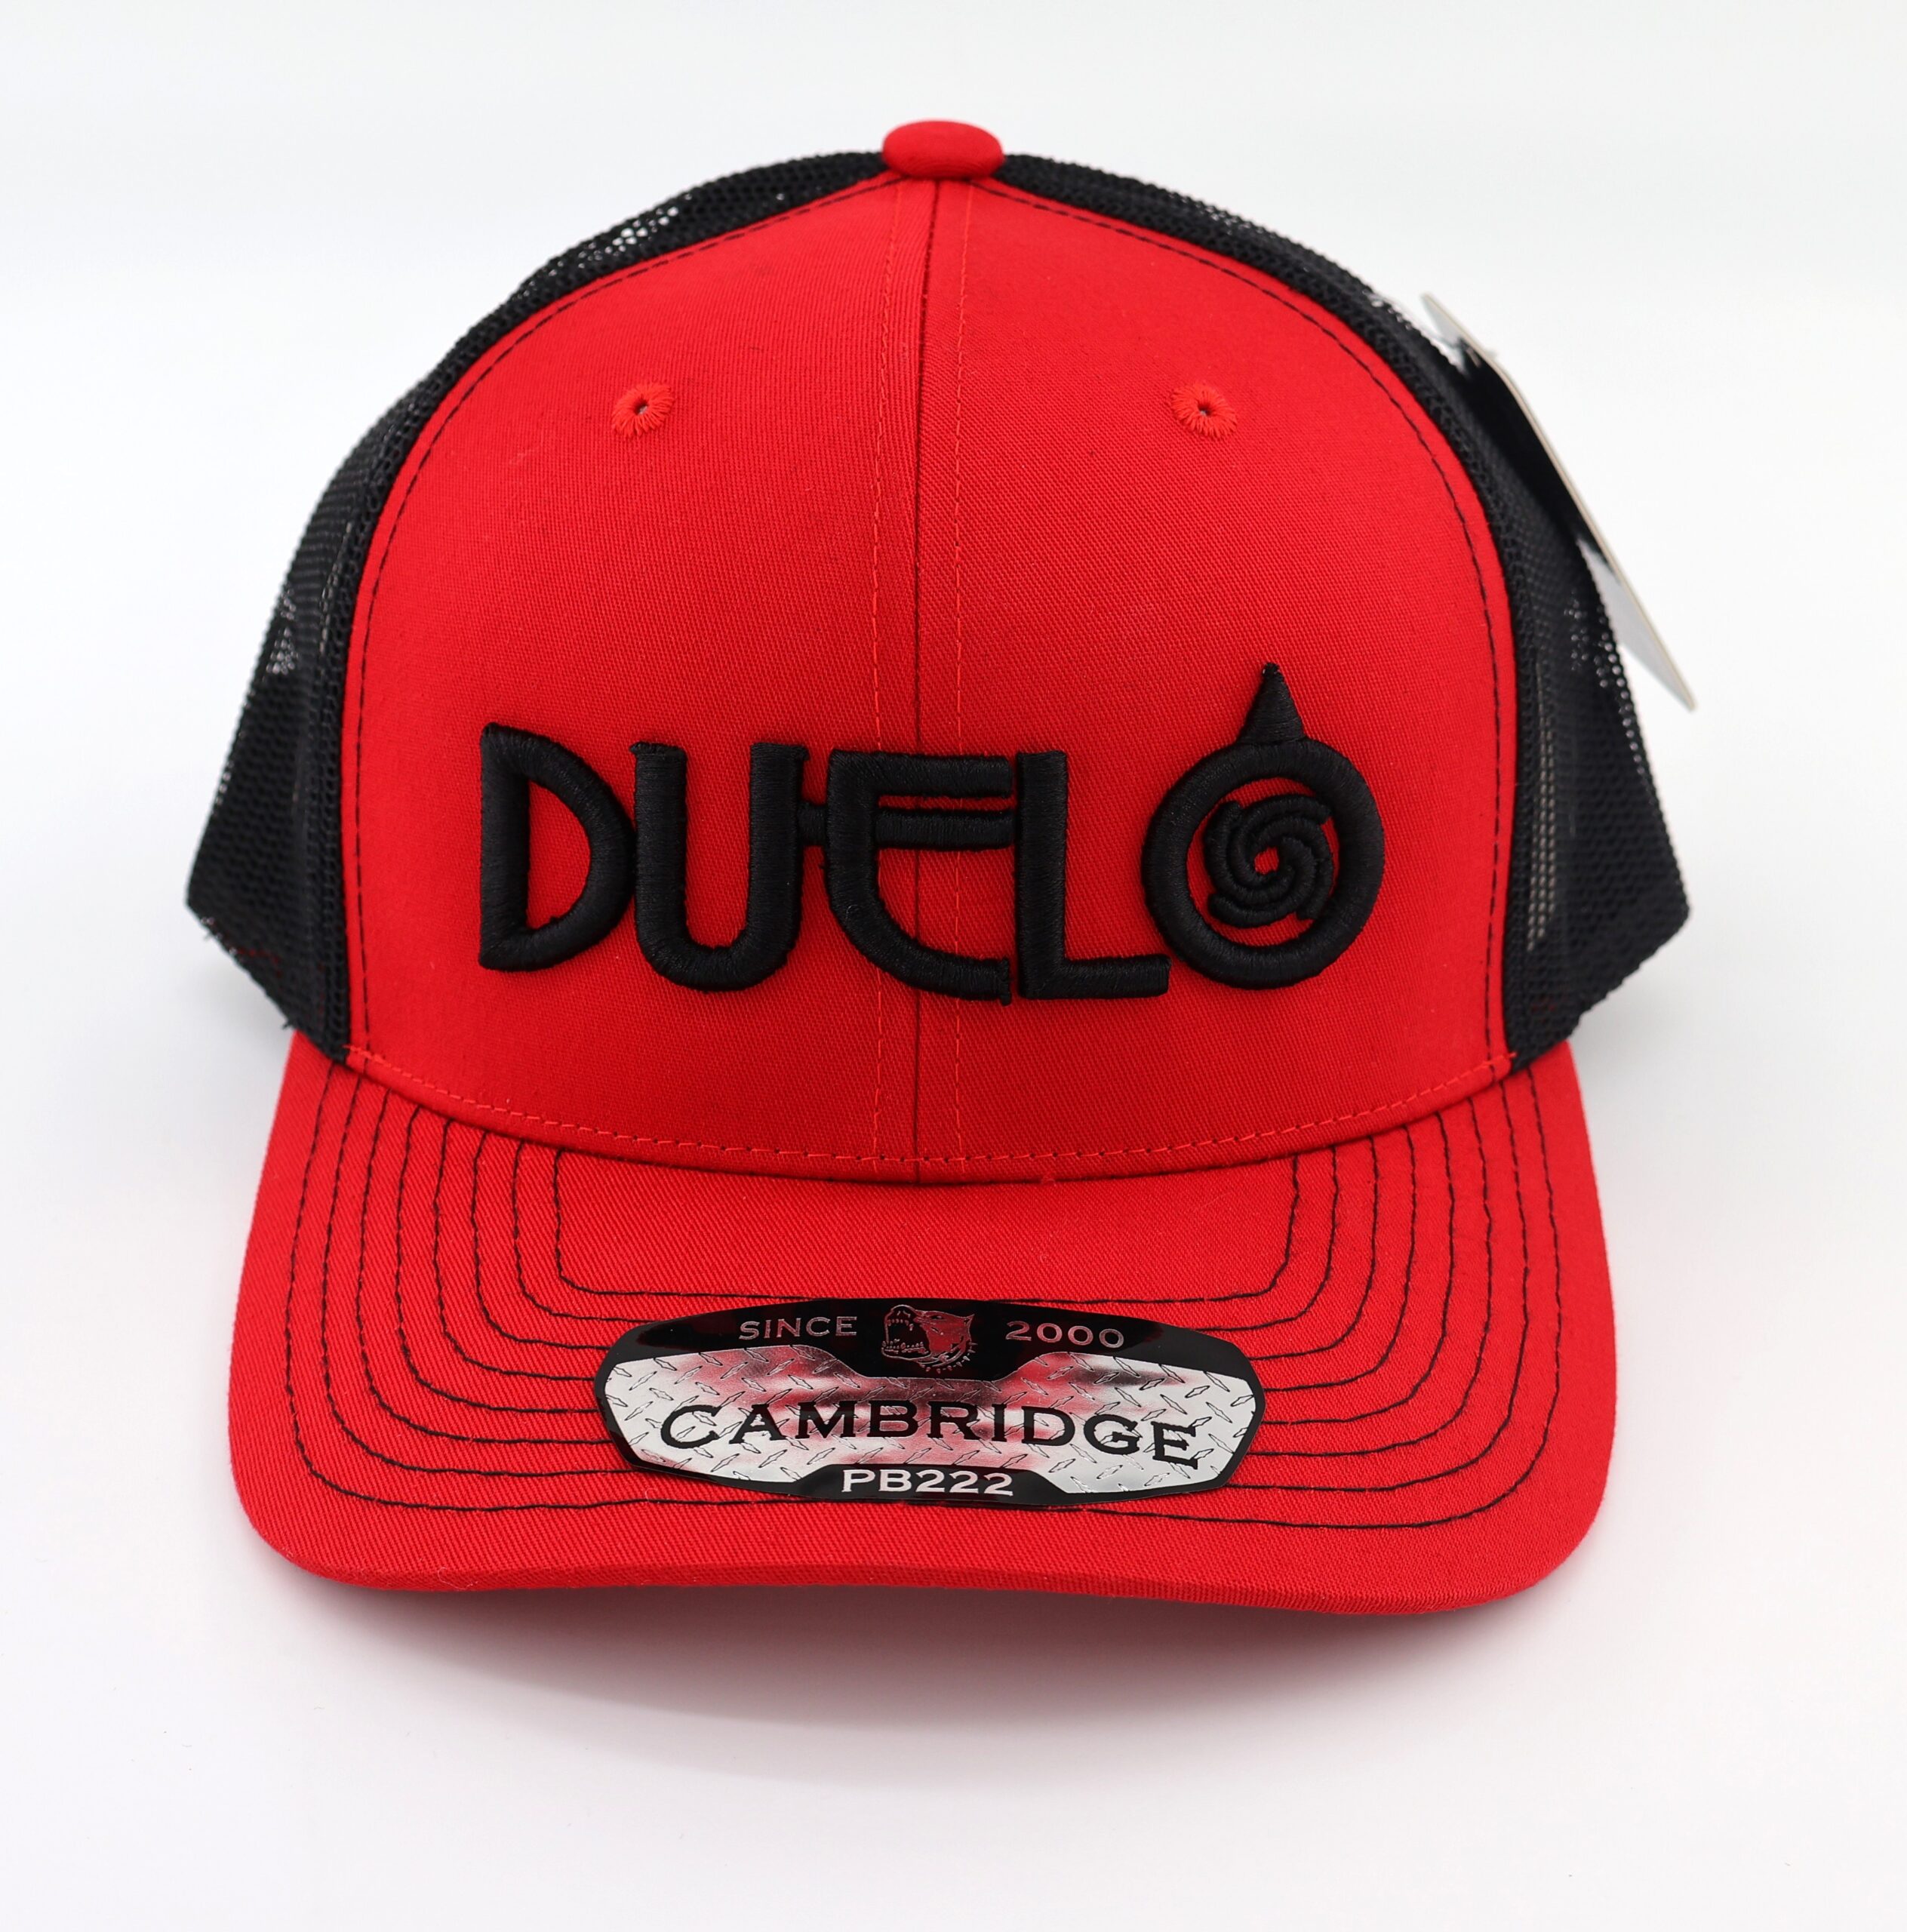 duelo embroidered 3d puff cap